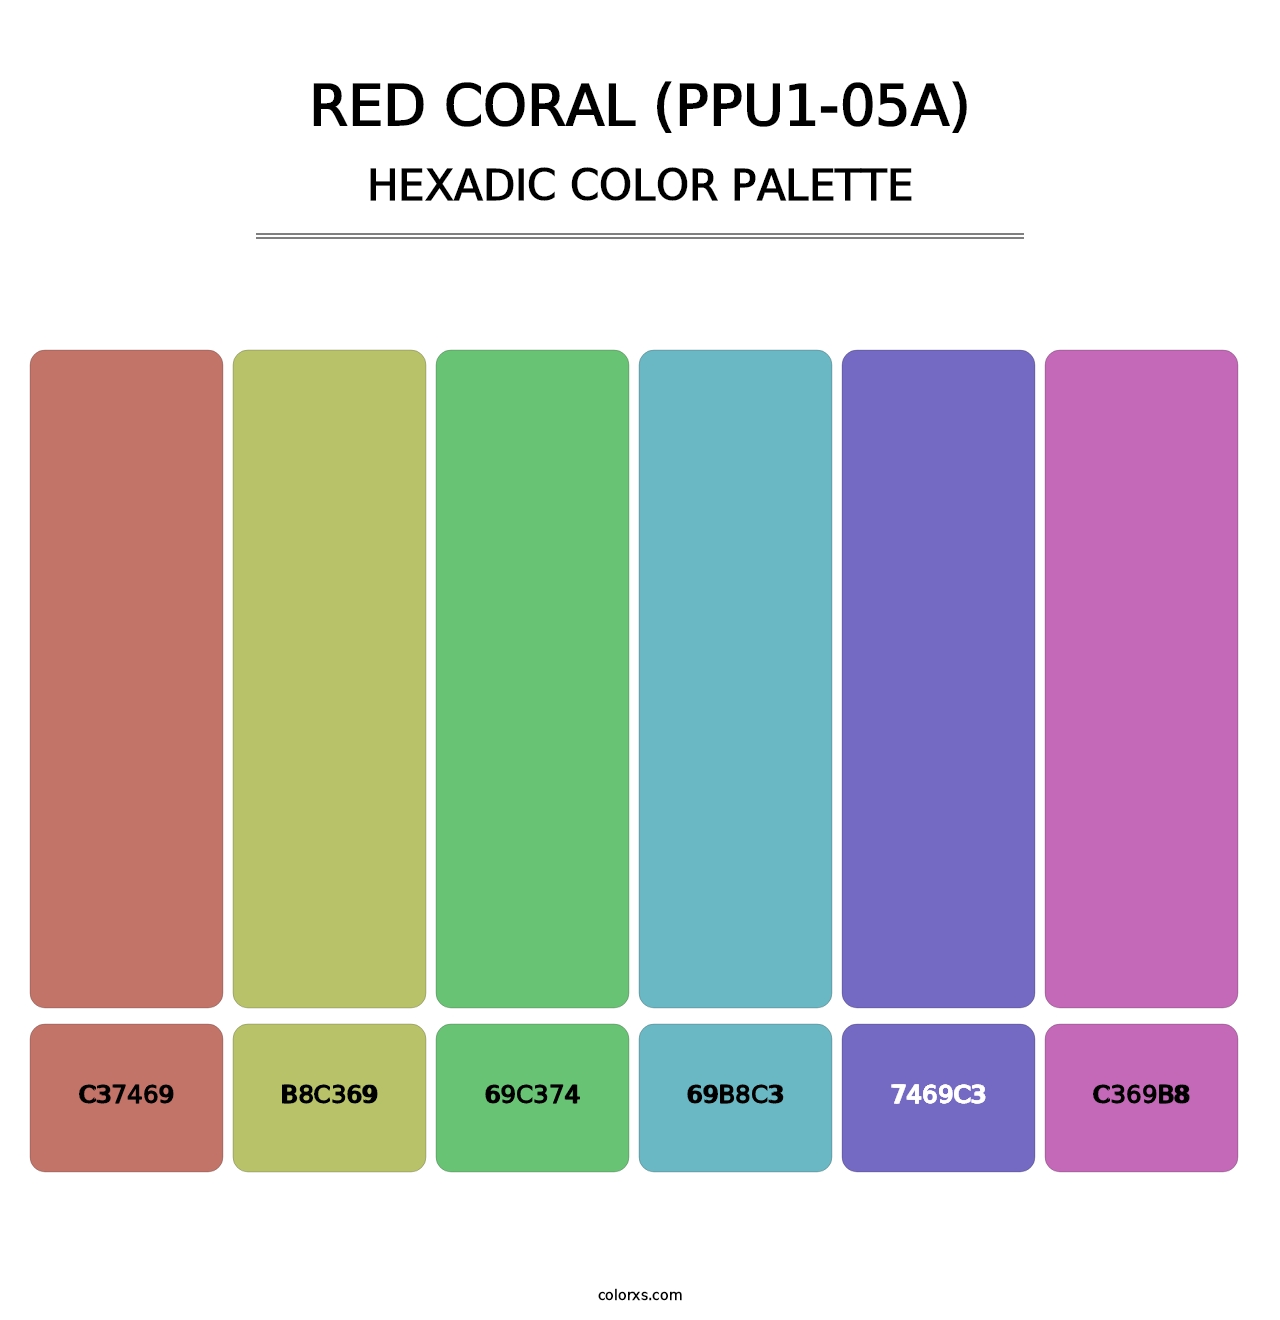 Red Coral (PPU1-05A) - Hexadic Color Palette